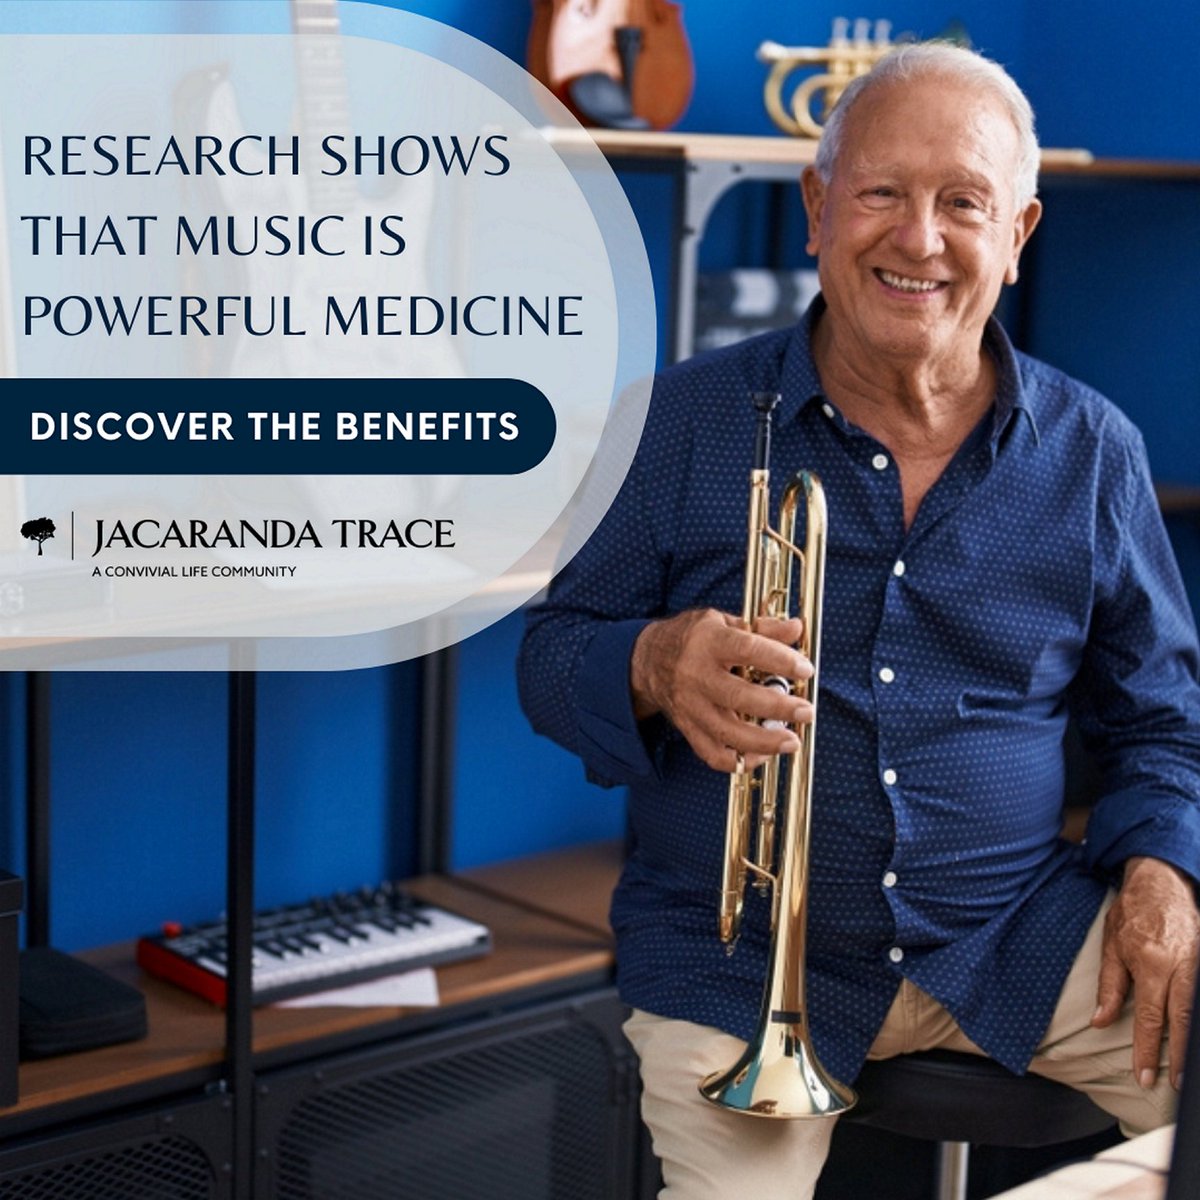 Music plays an important role for people of every age, but the benefits are astonishing for older adults. 🎵 Read on to discover the full benefits: nuvi.me/nlkii3 

#music #jacarandatrace #veniceflorida #seniorliving #retirement #seniors #independentliving